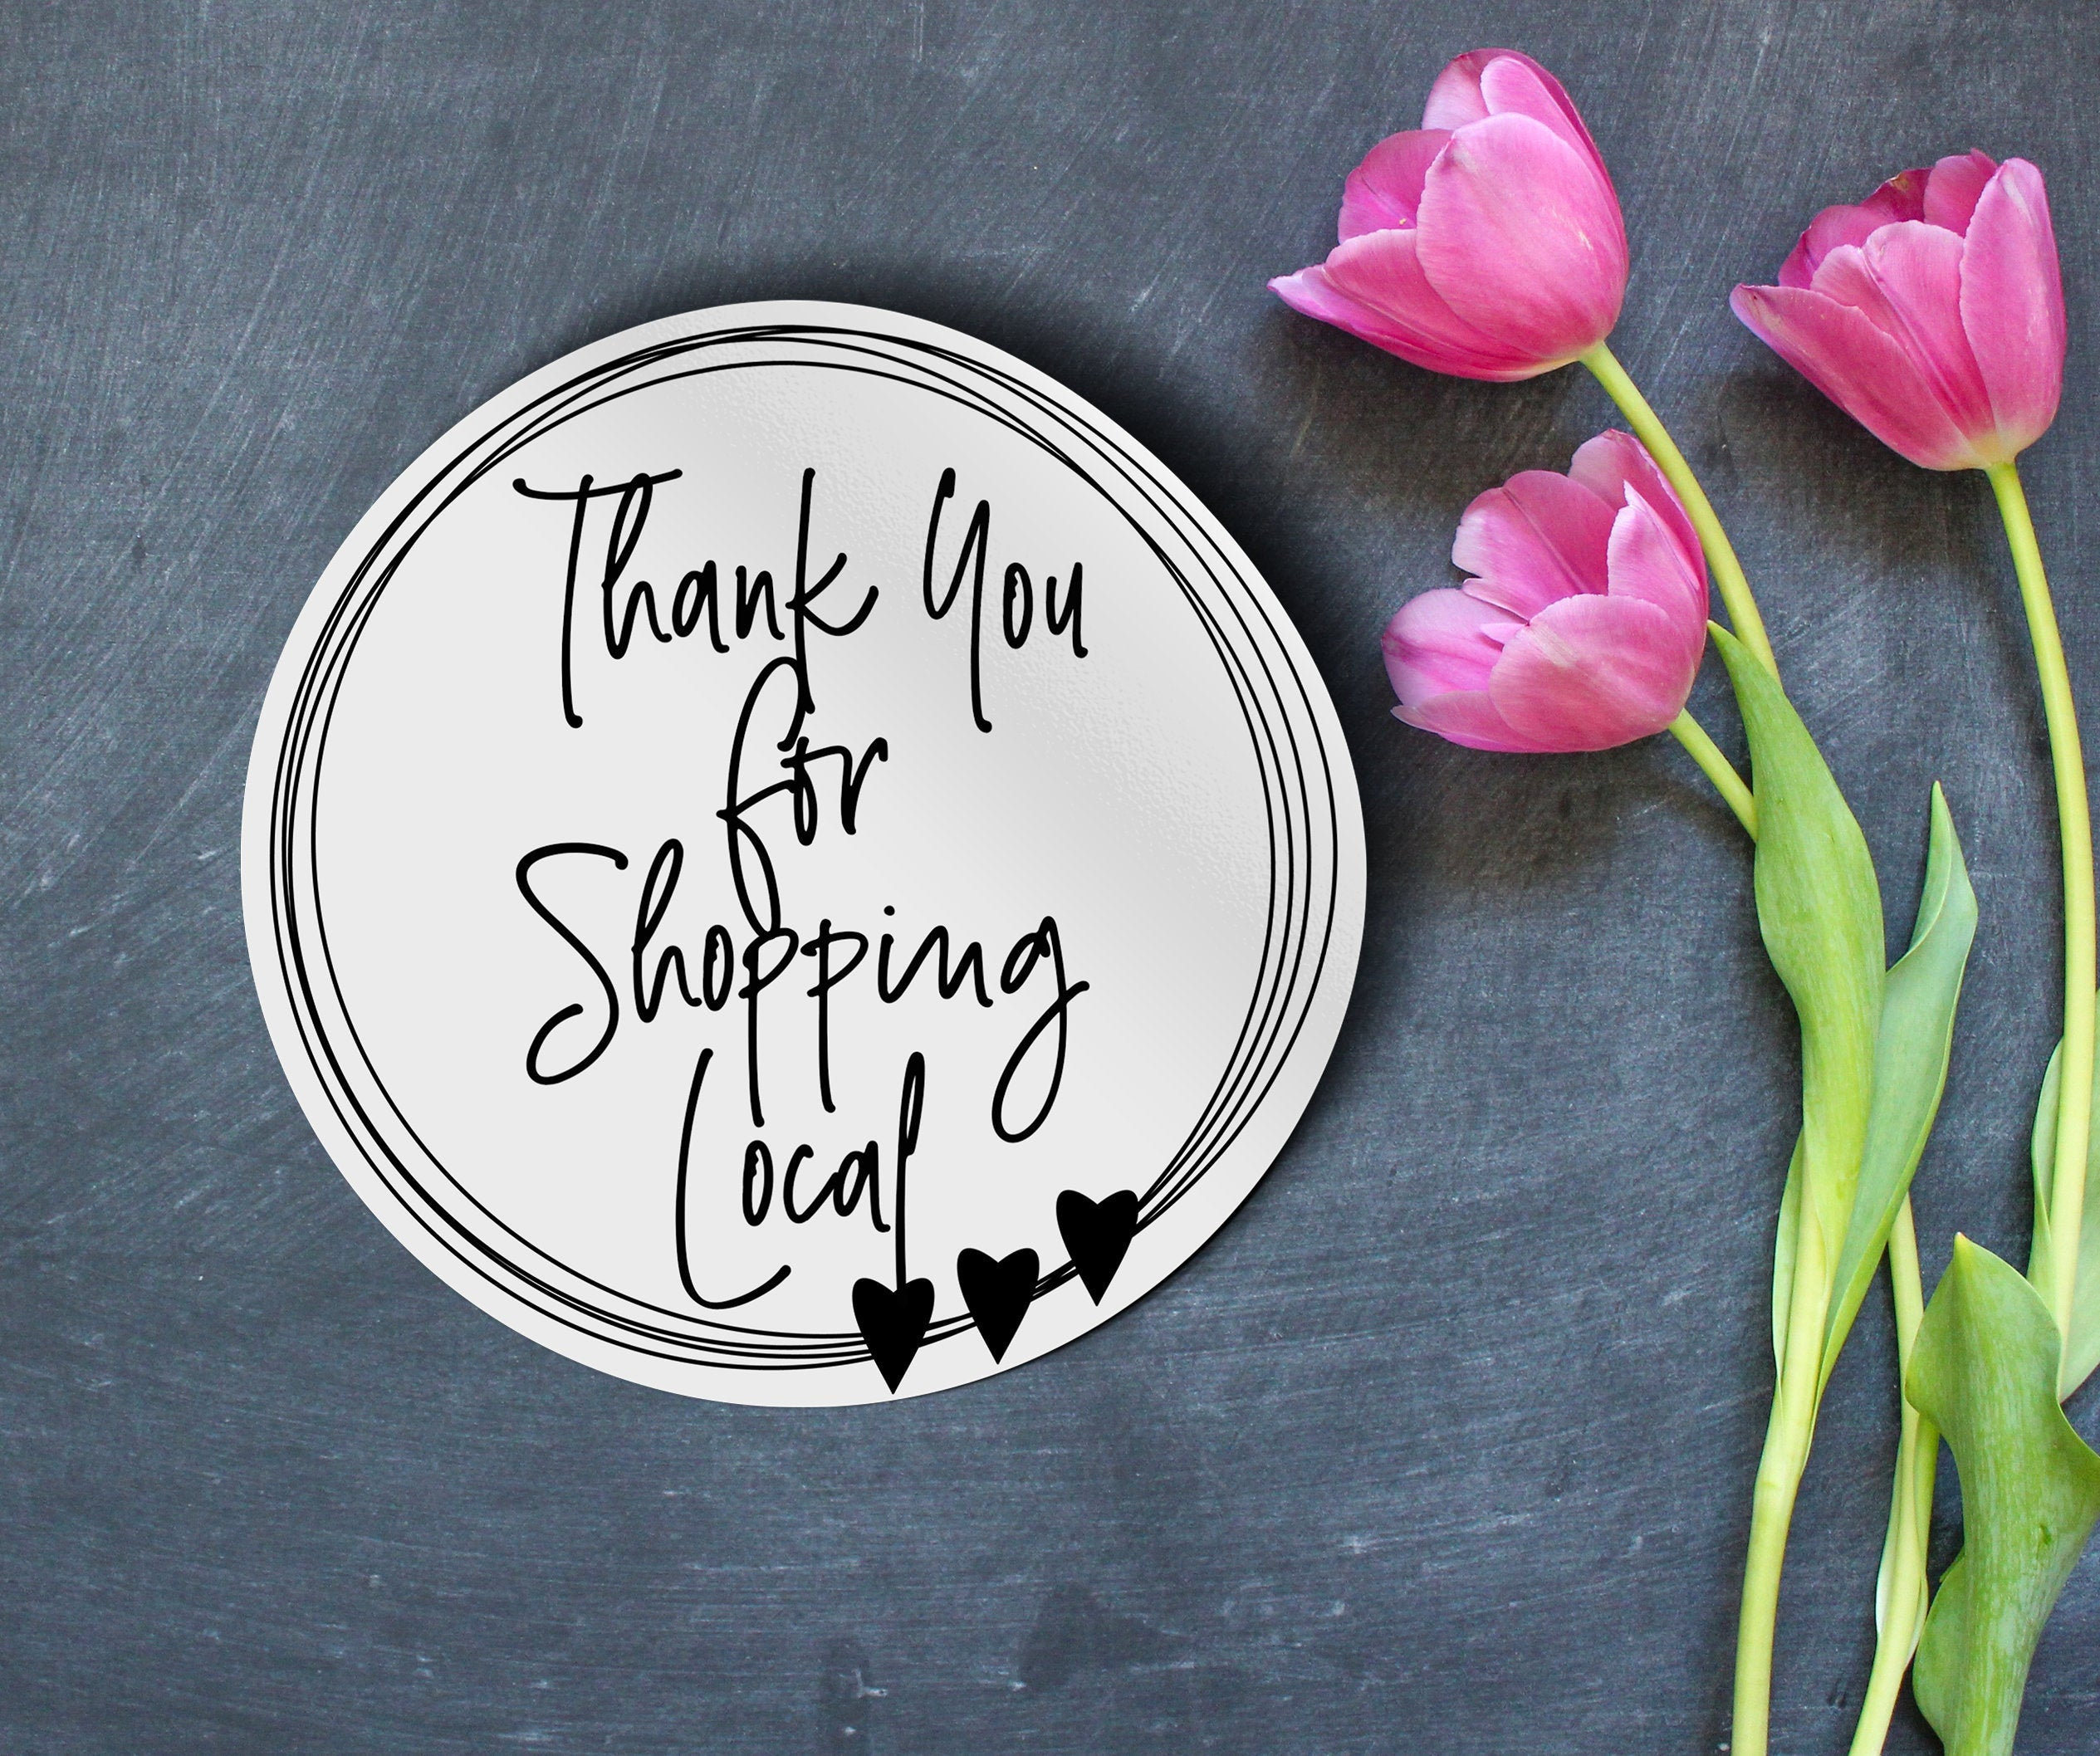 Thank You For Shopping Local Sticker For Small Shops And Etsy